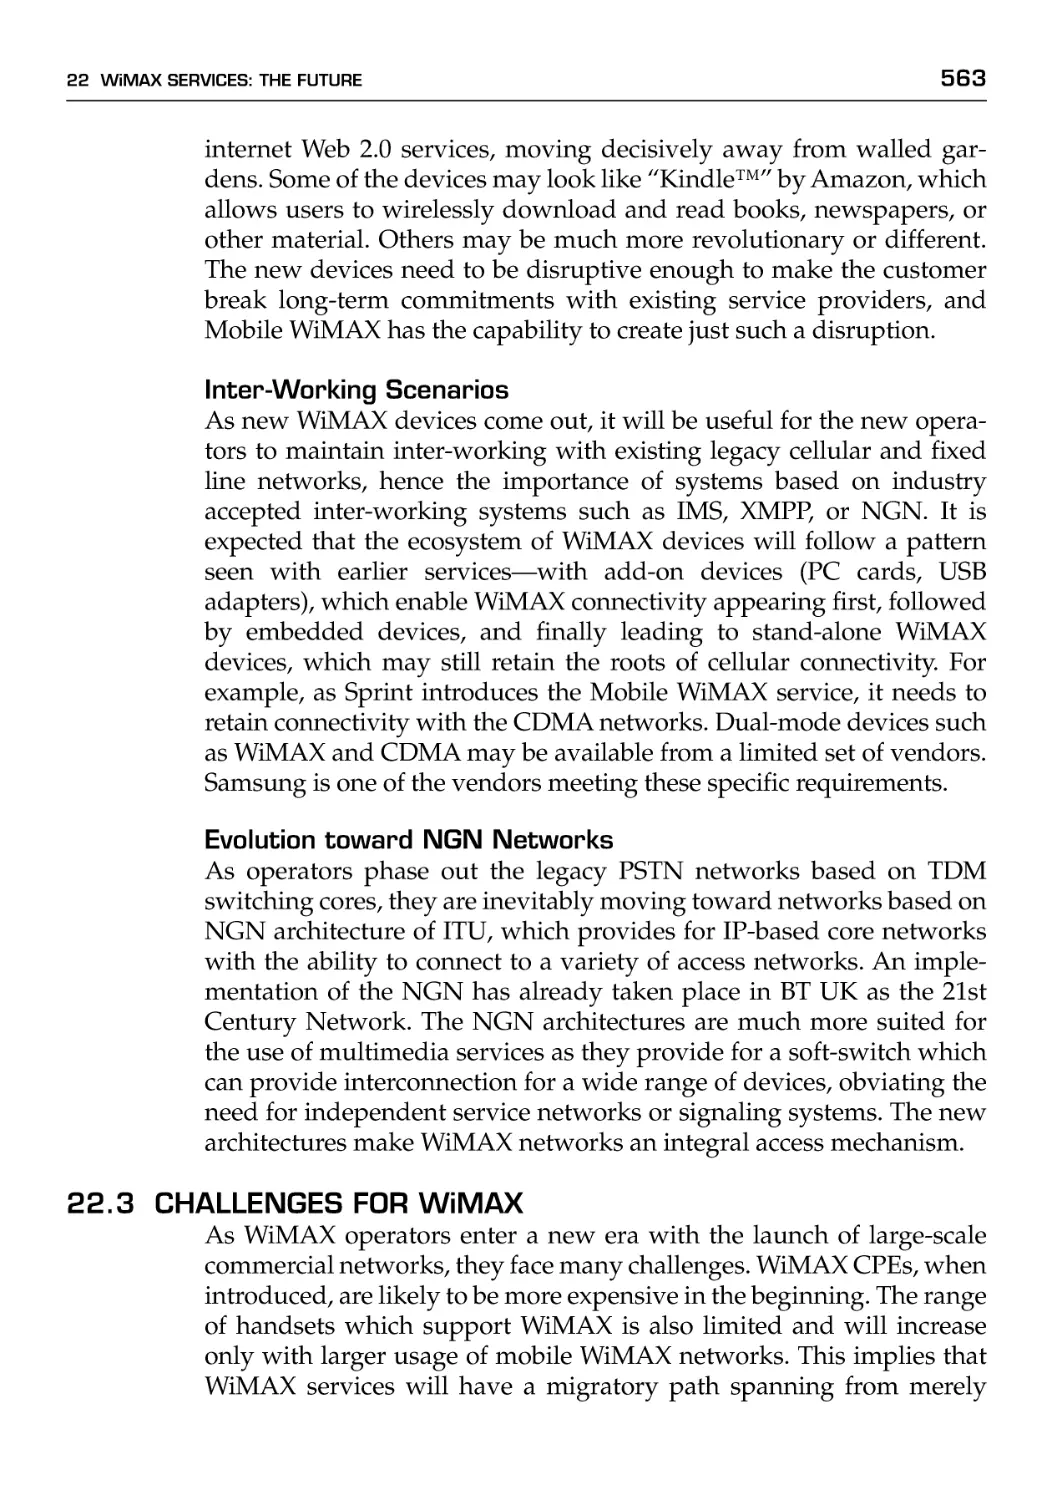 22.3 Challenges for WiMAX